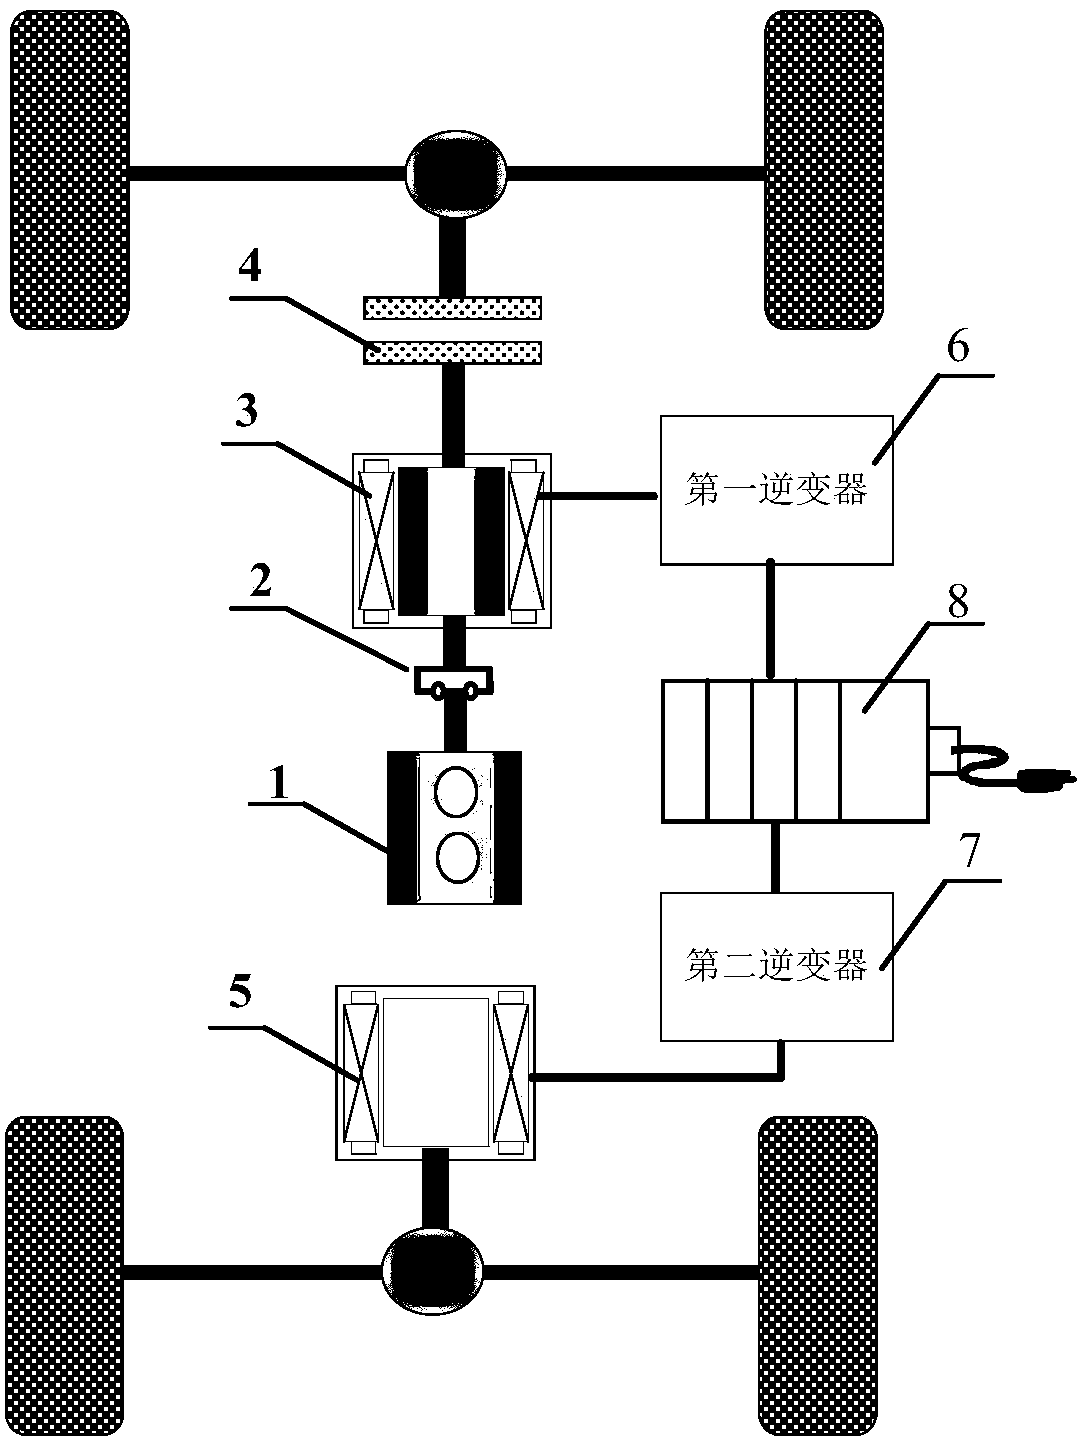 Four-wheel drive electric vehicle power system and control method